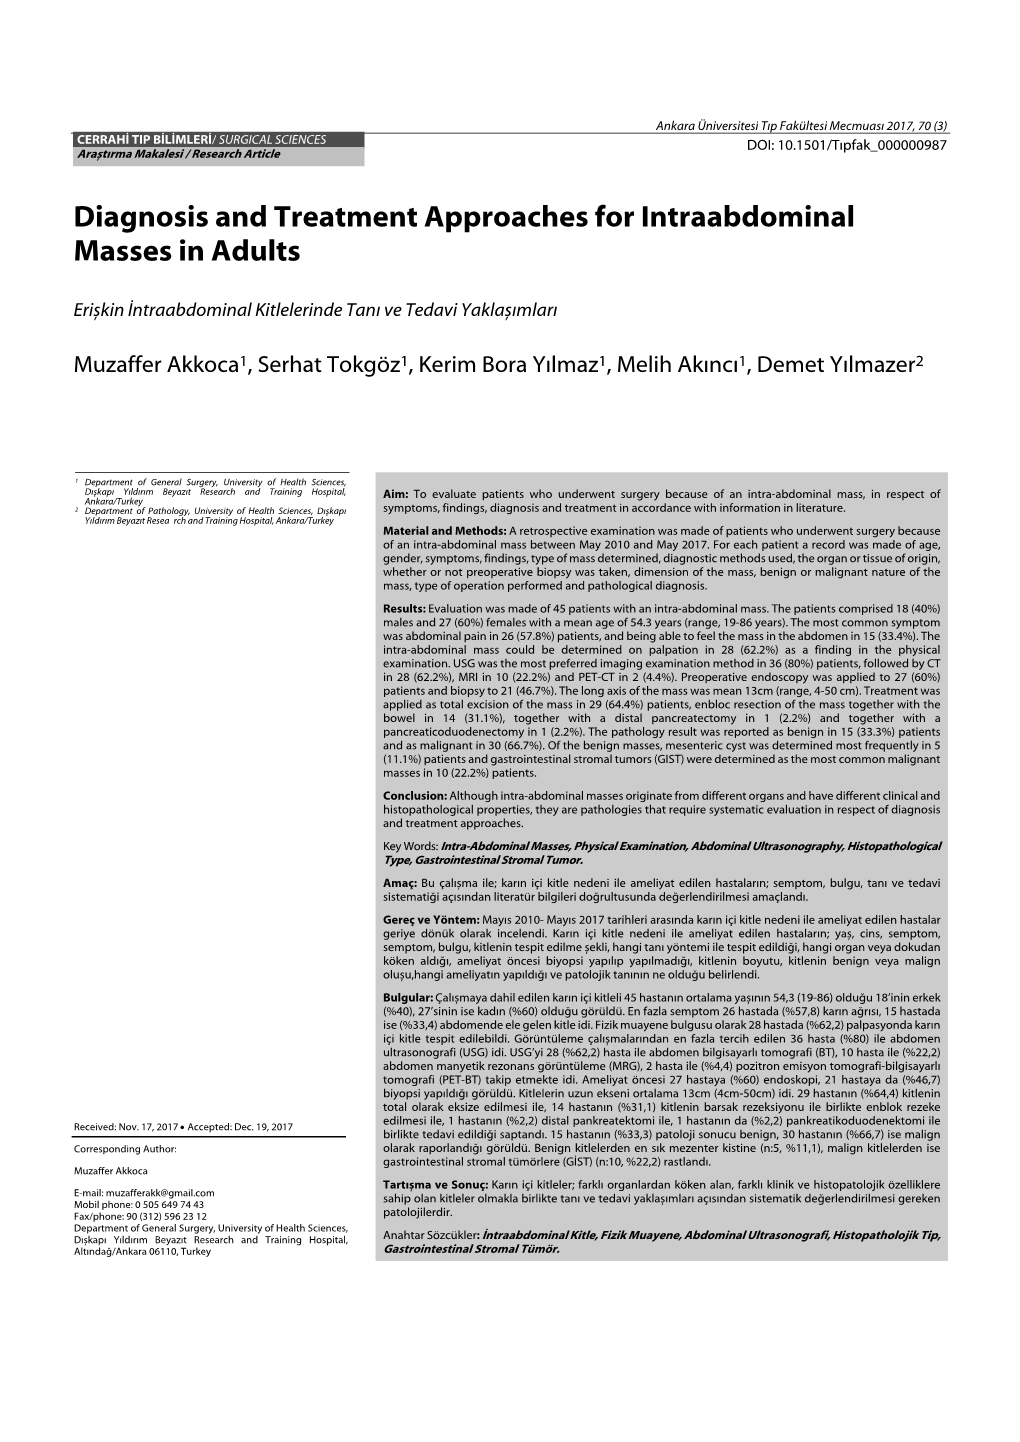 Diagnosis and Treatment Approaches for Intraabdominal Masses in Adults